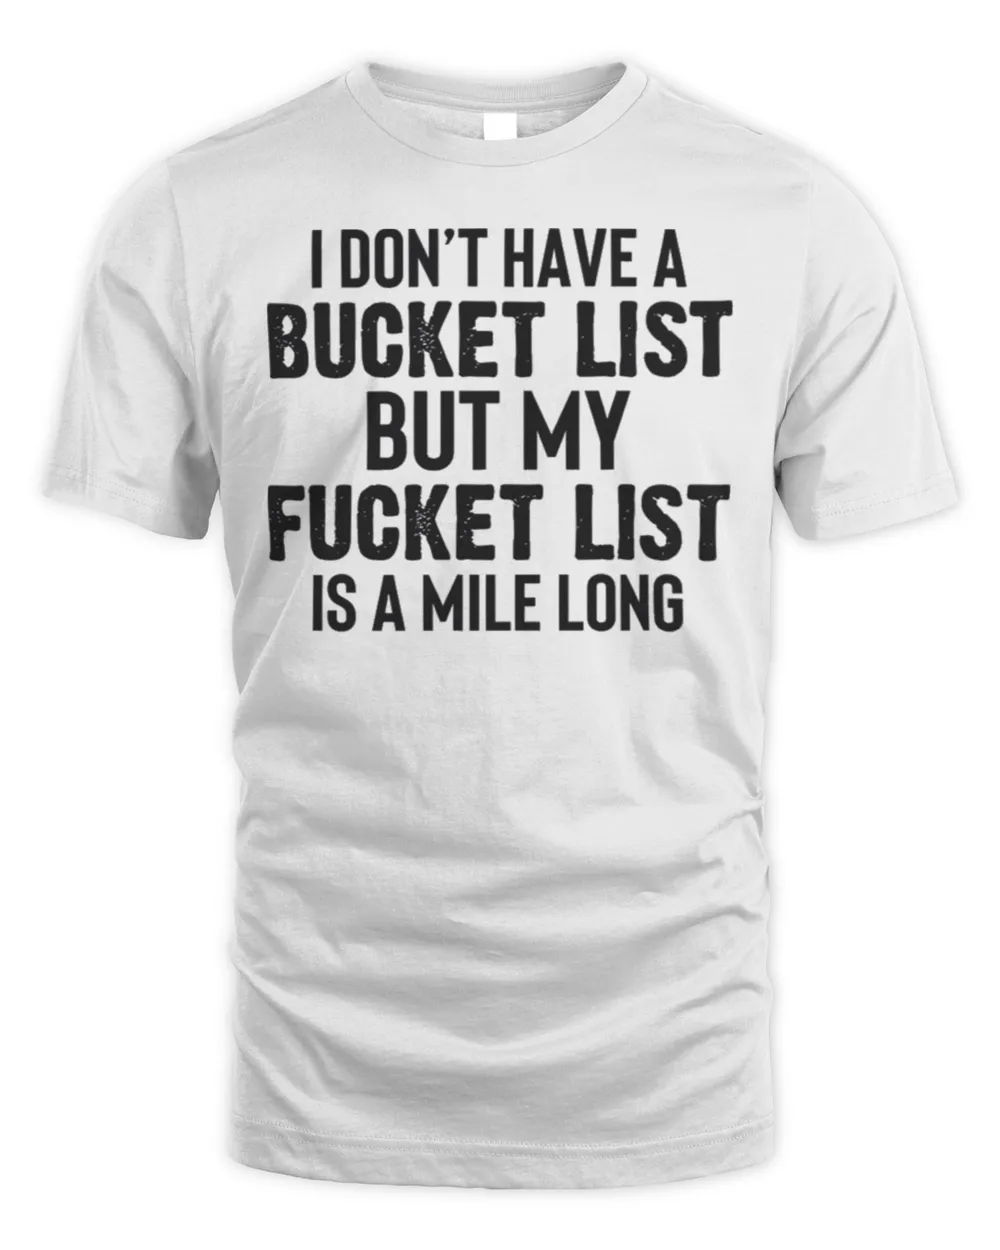 I don’t have a bucket list but my fucket list is a mile long shirt